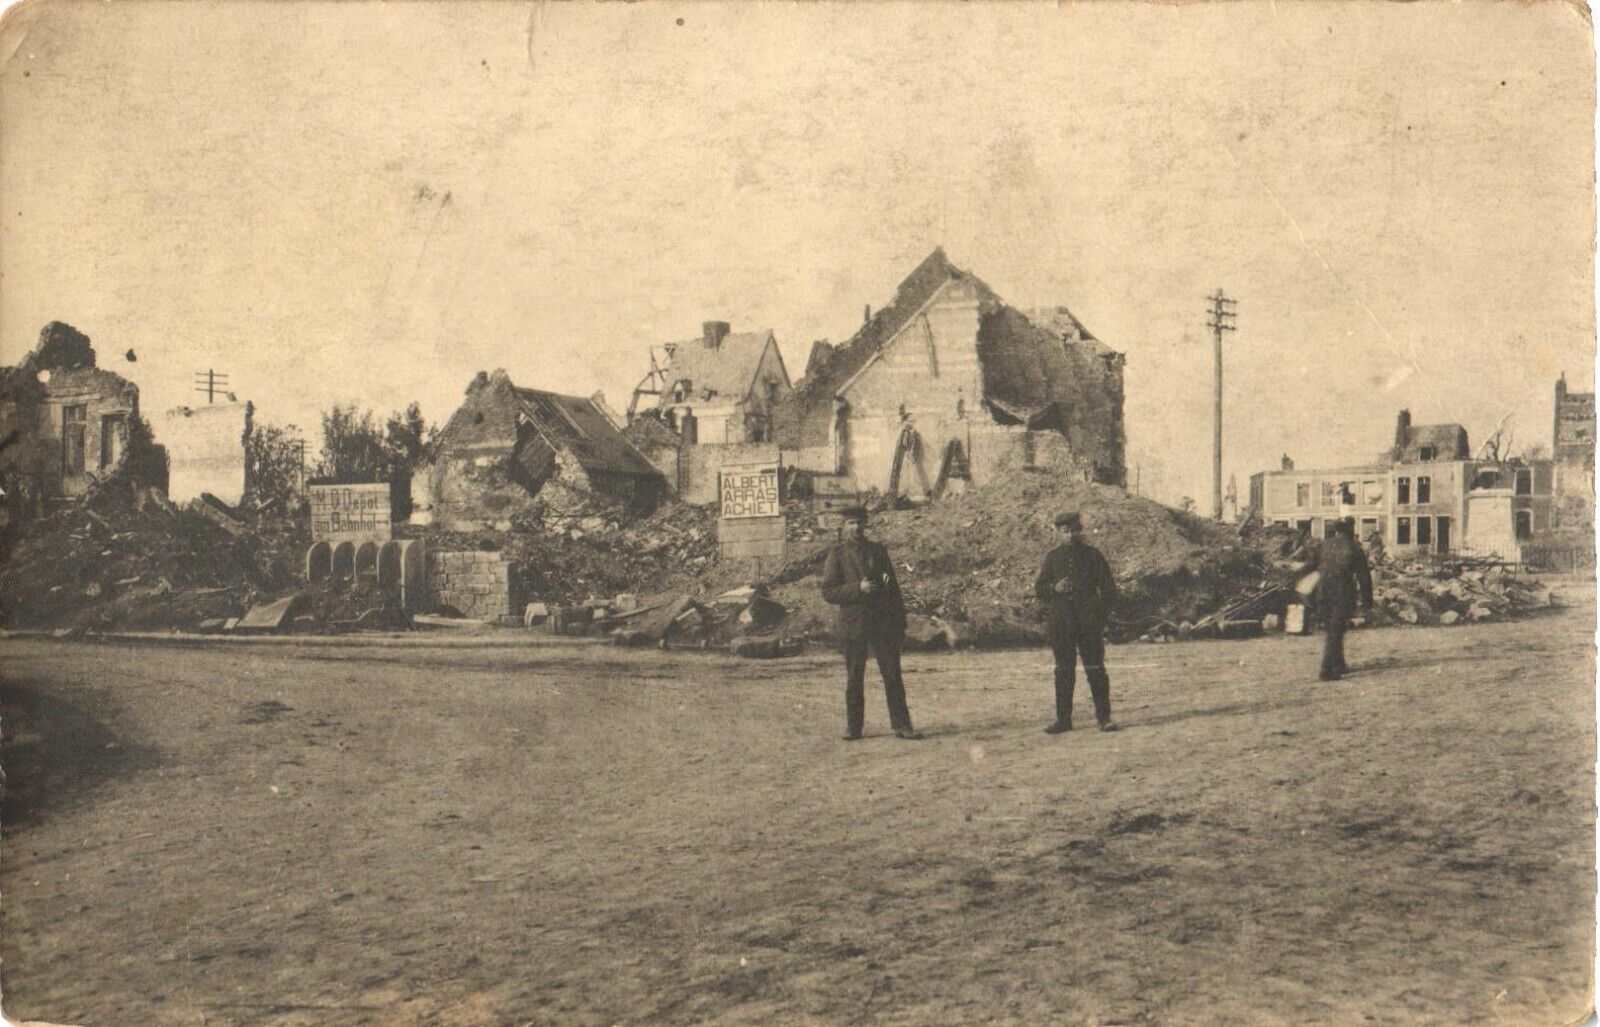 An Old Photo of Men In Uniform Along Ruined Houses Postcard